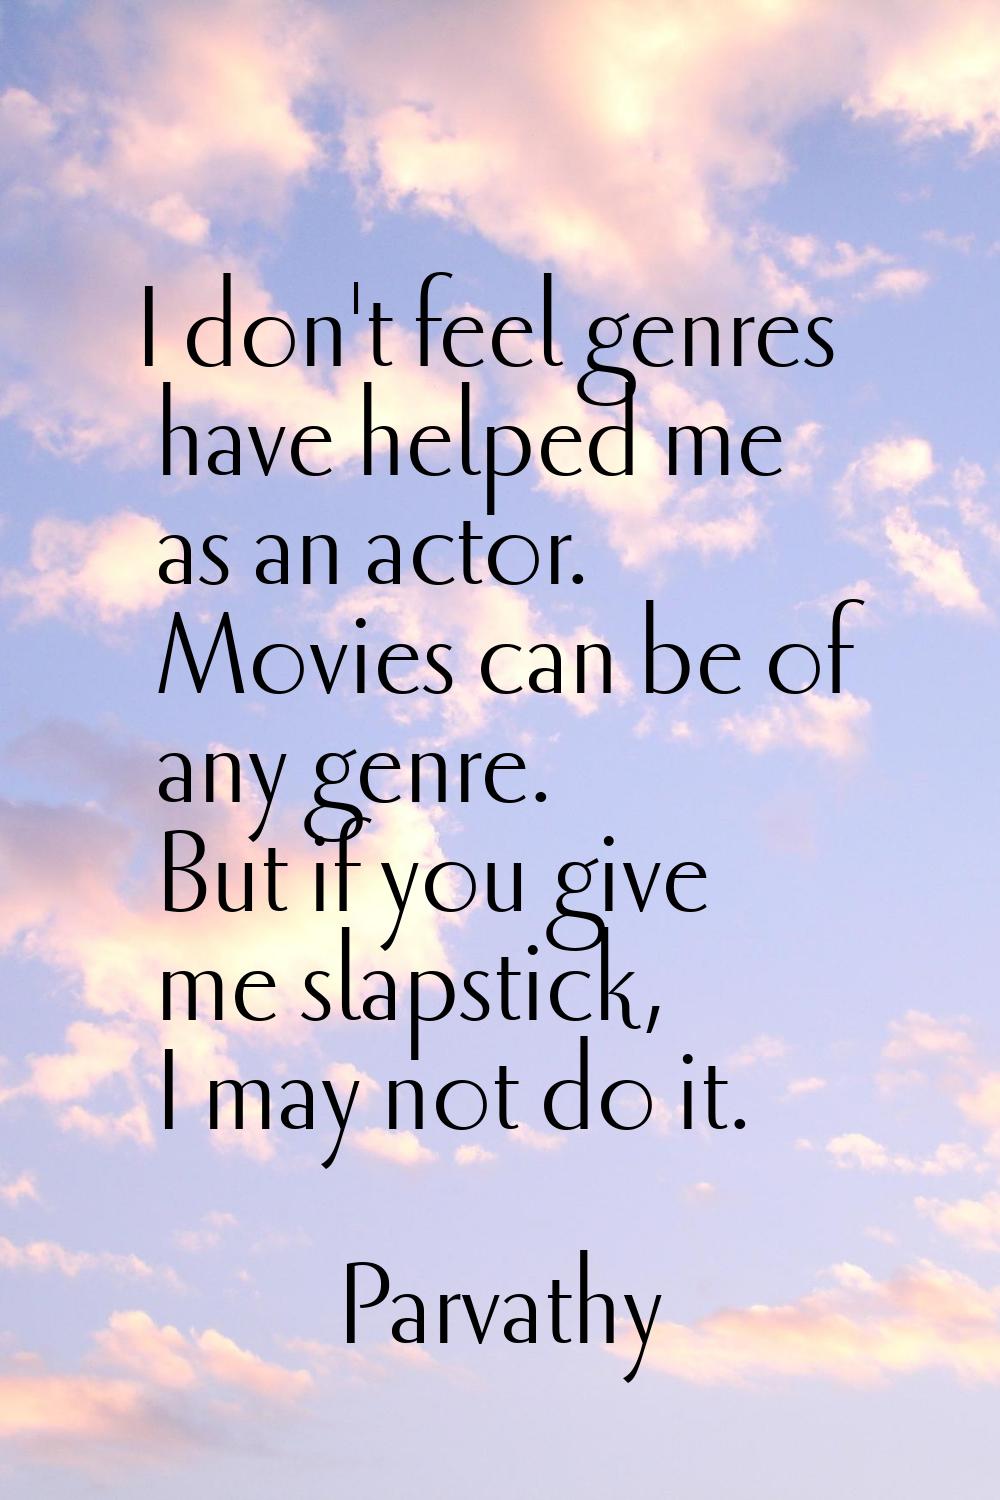 I don't feel genres have helped me as an actor. Movies can be of any genre. But if you give me slap